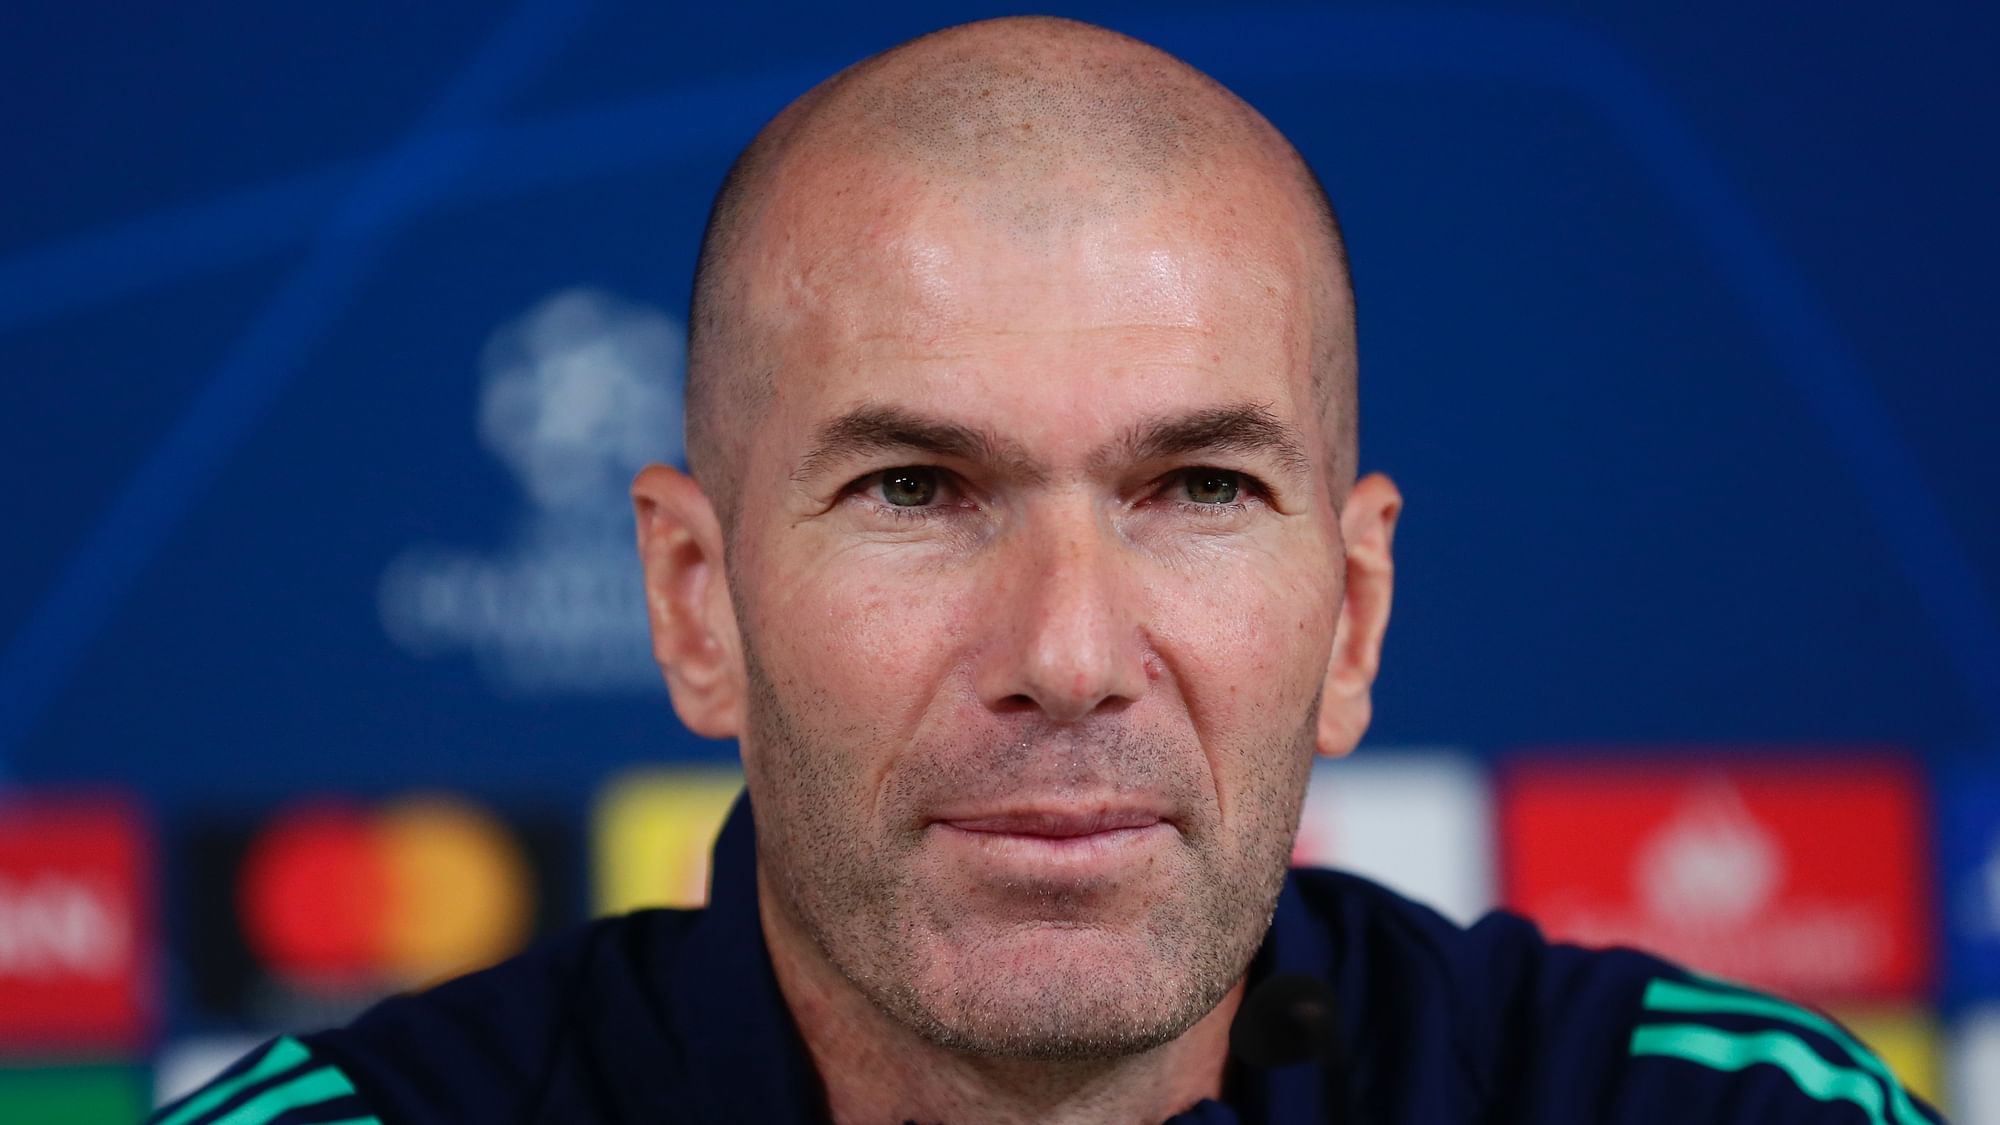 Real Madrid coach Zinedine Zidane said his team is solely focused on lifting the Spanish Super Cup trophy ahead of this week’s Super Cup.